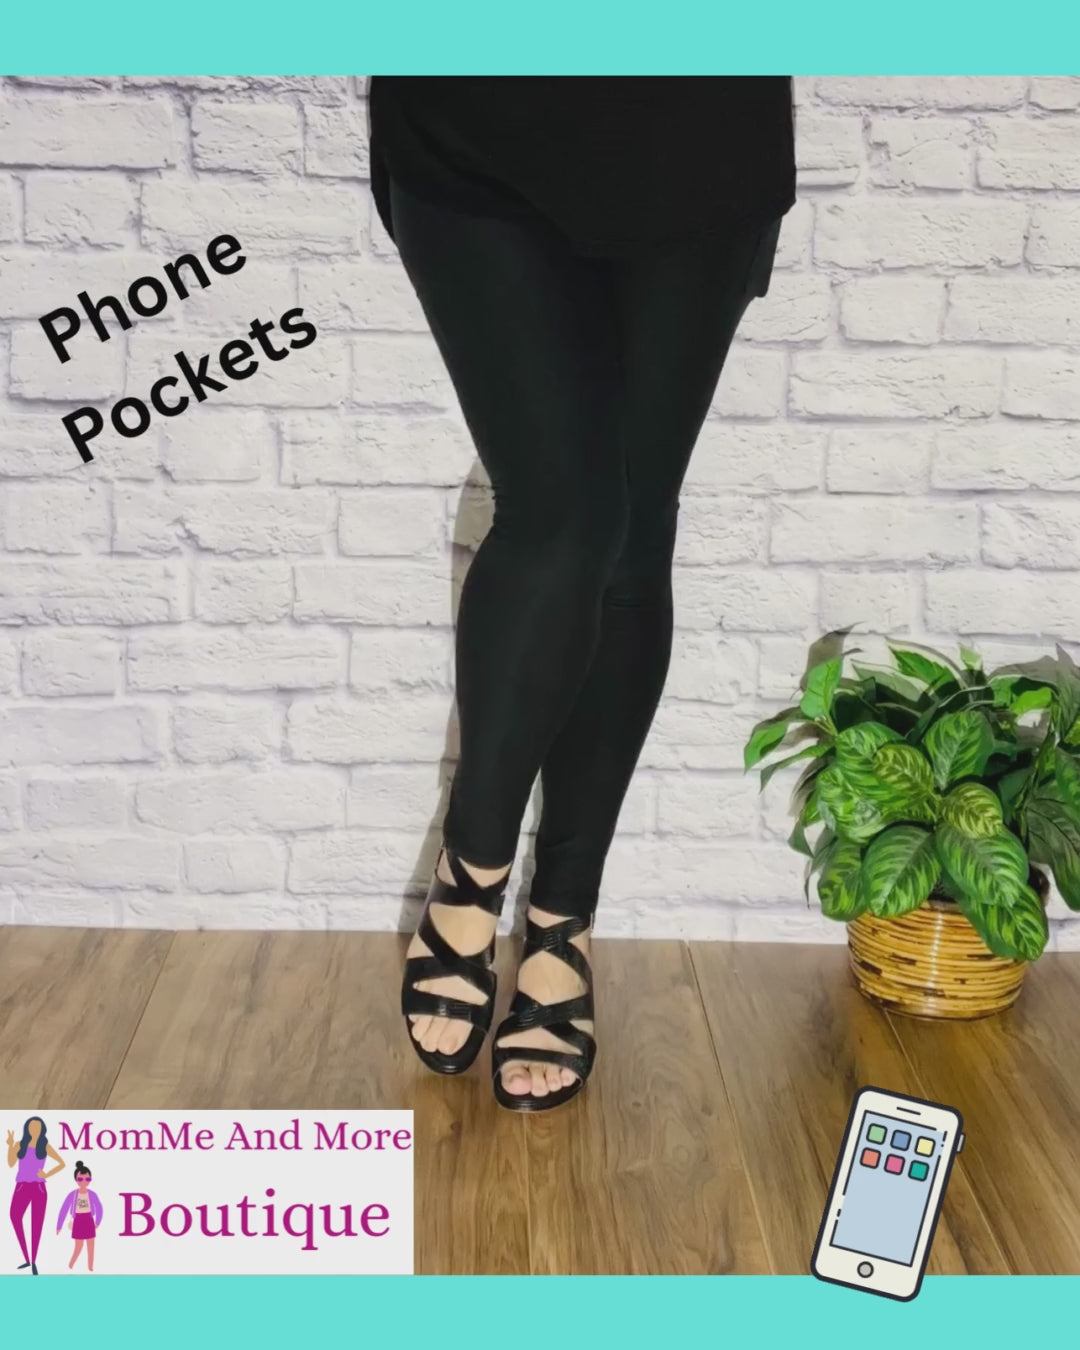 The best leggings with pockets